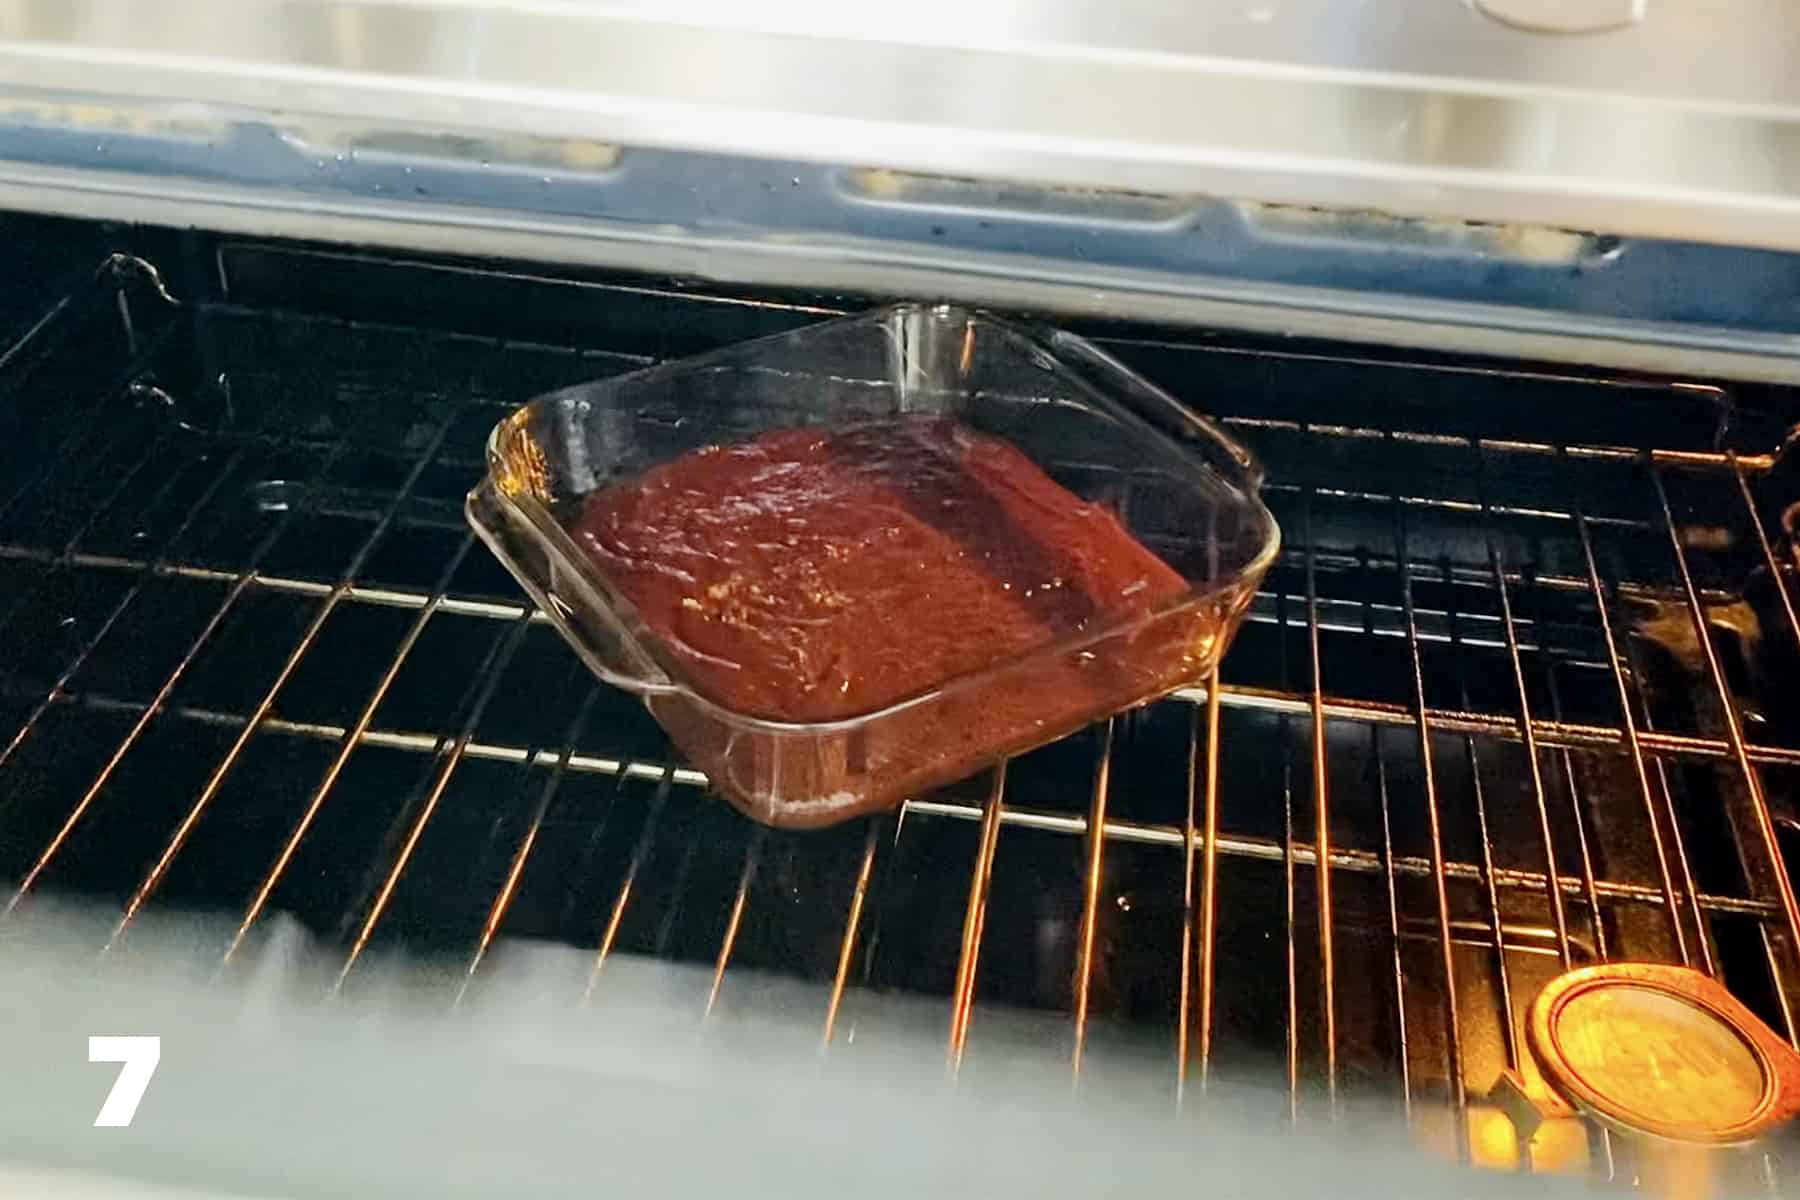 dairy free chocolate brownies in baking dish in oven